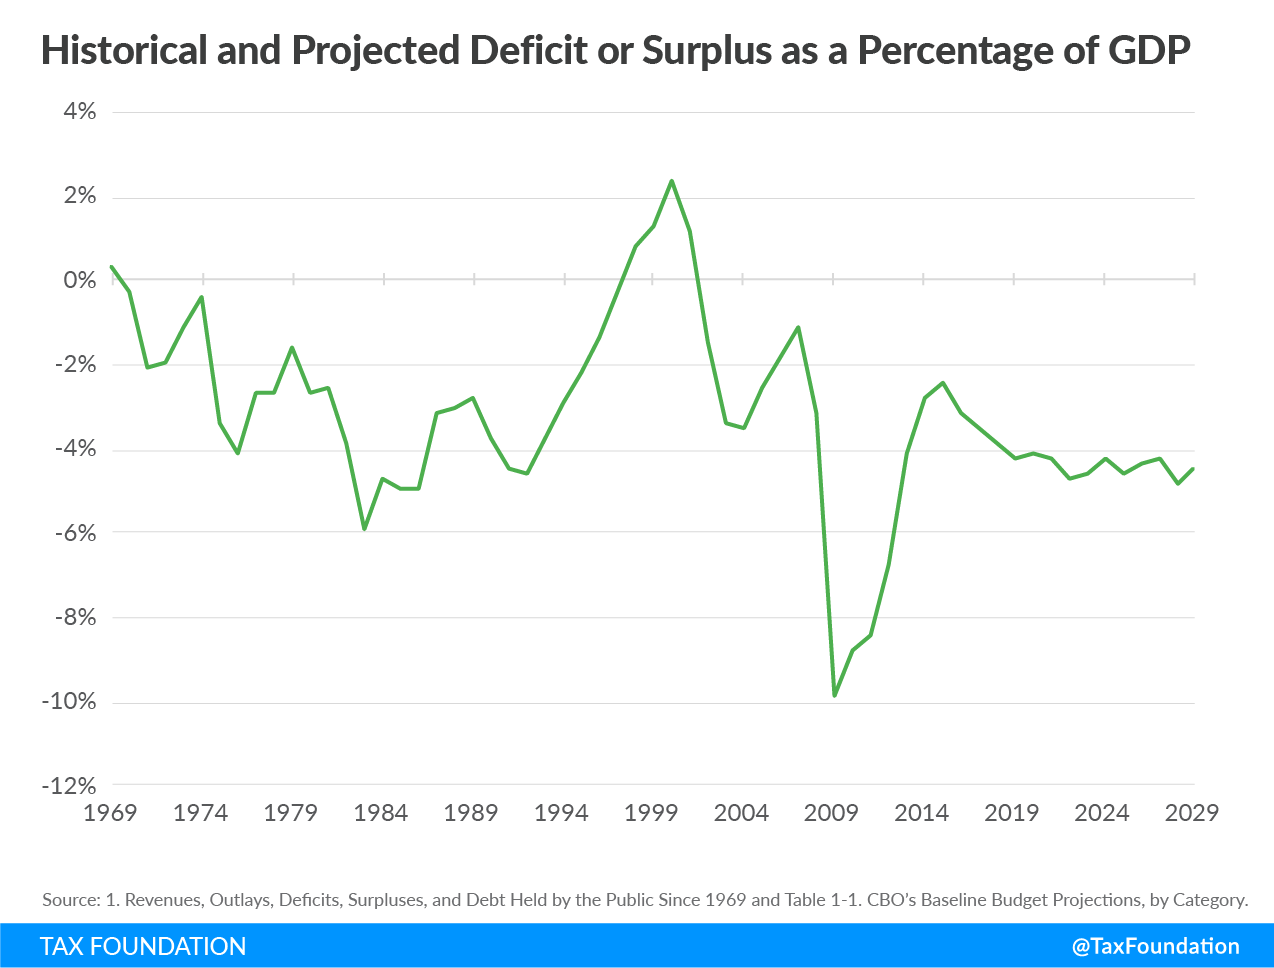 Historical and projected deficit or surplus as a percentage of GDP